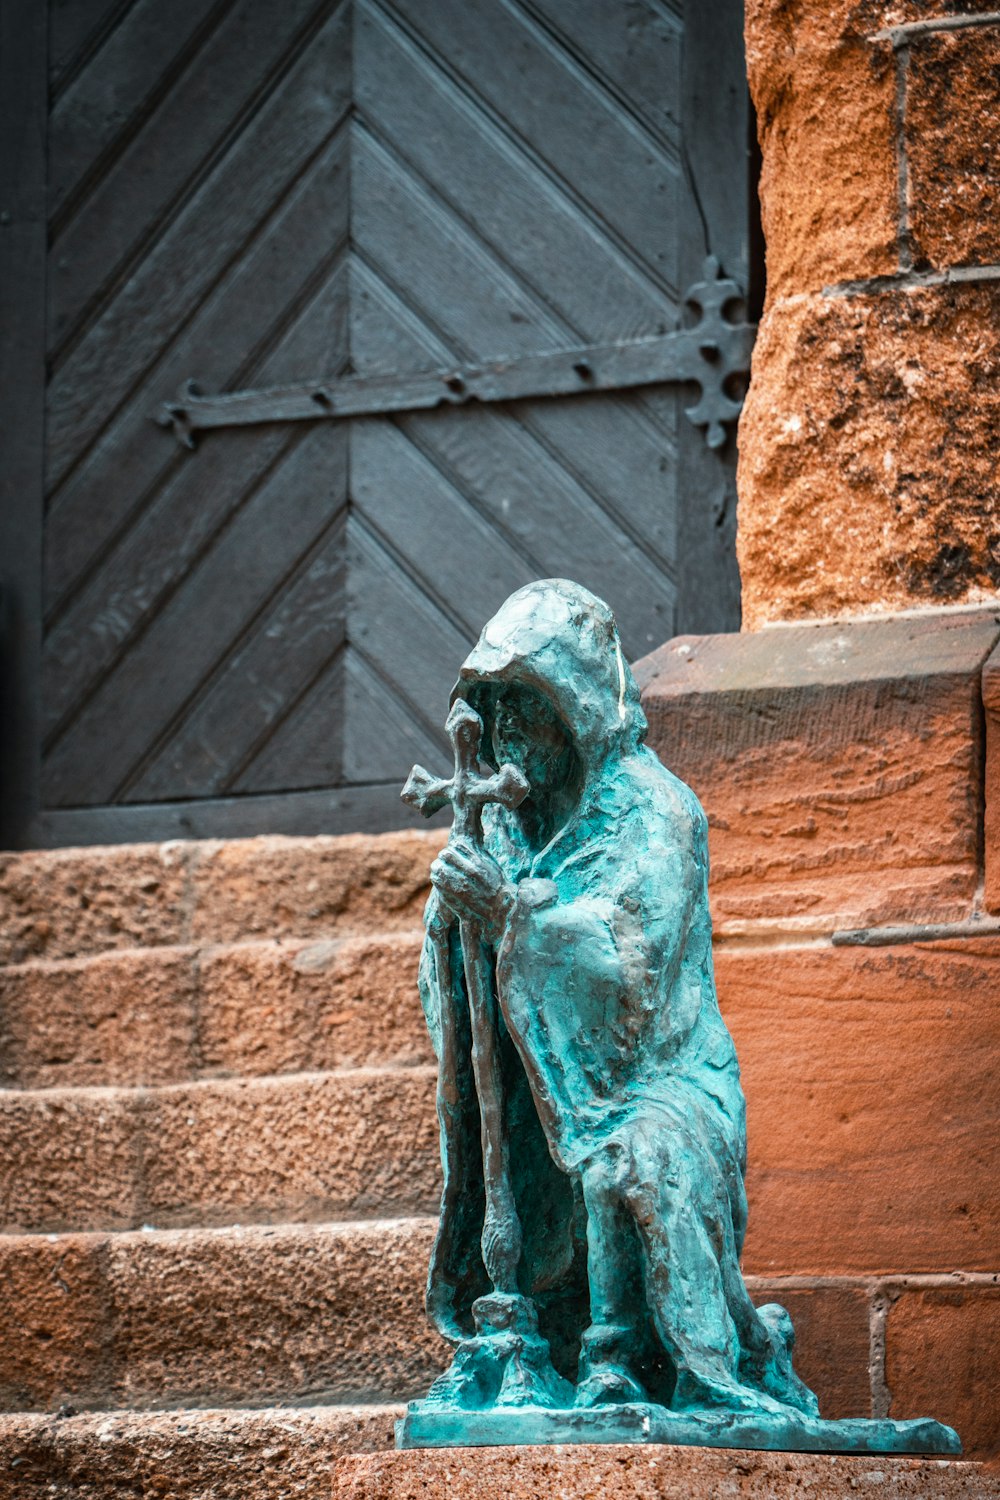 a statue of a person sitting on a step